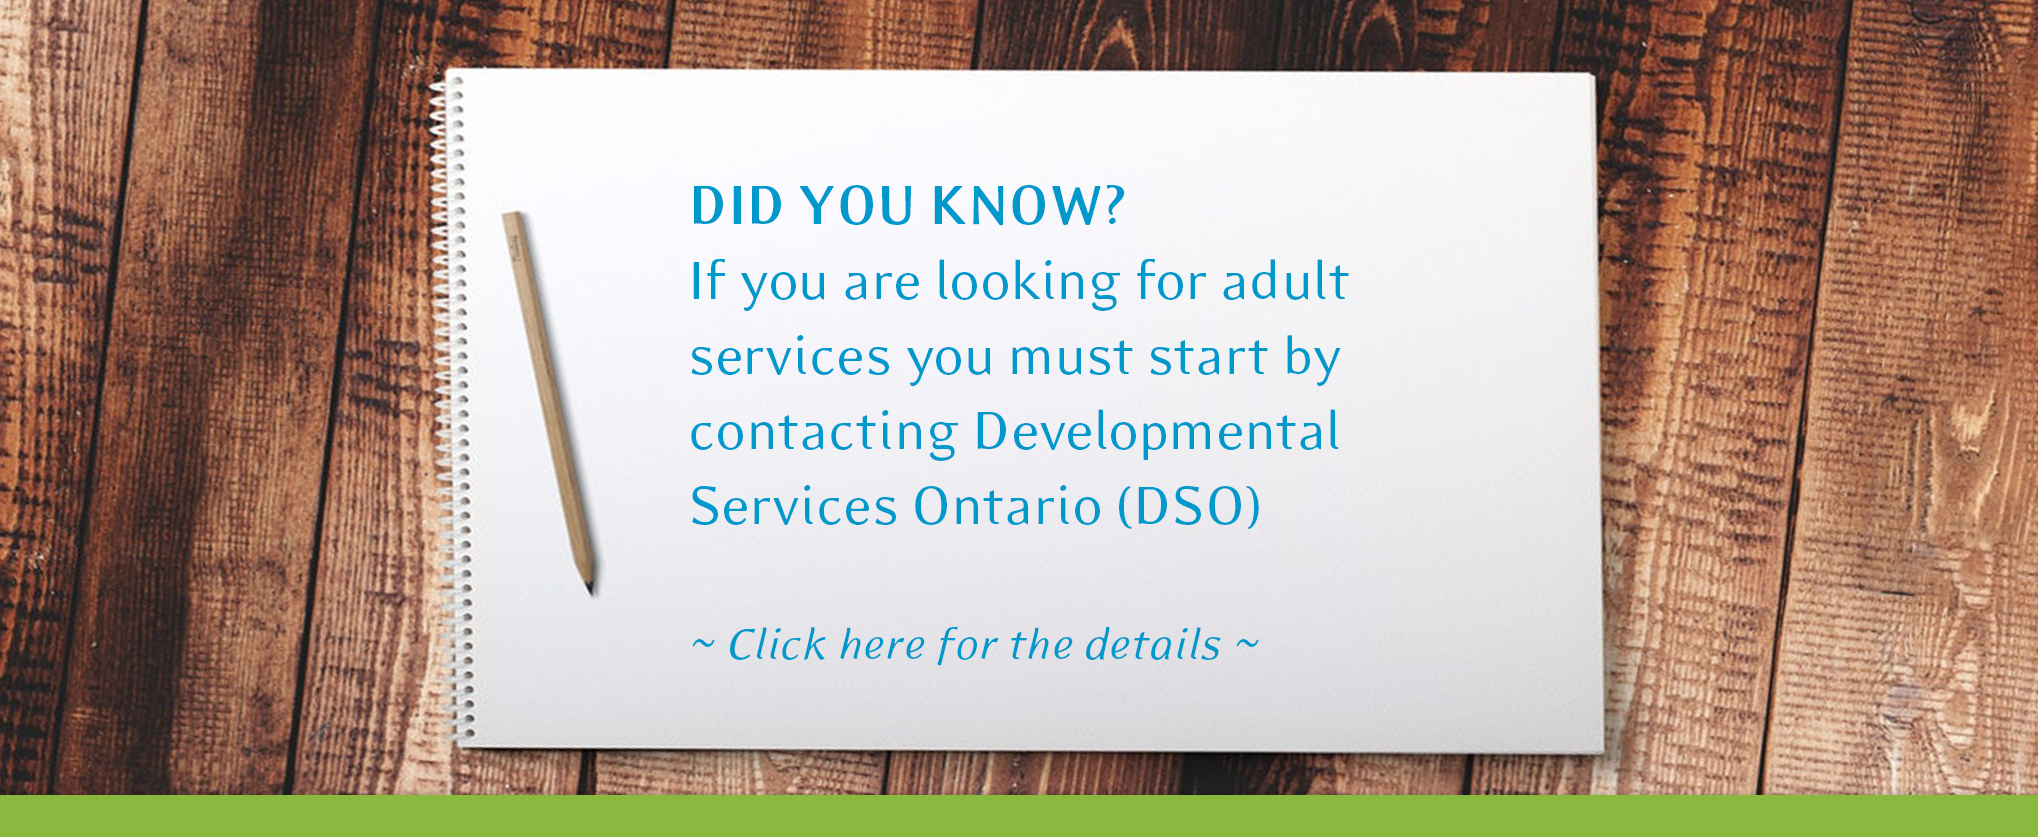 Did-you-know-if-you-are-looking-for-adult-services-you-must-start-by-contacting-Developmental-services-ontario-dso-click-here-for-details